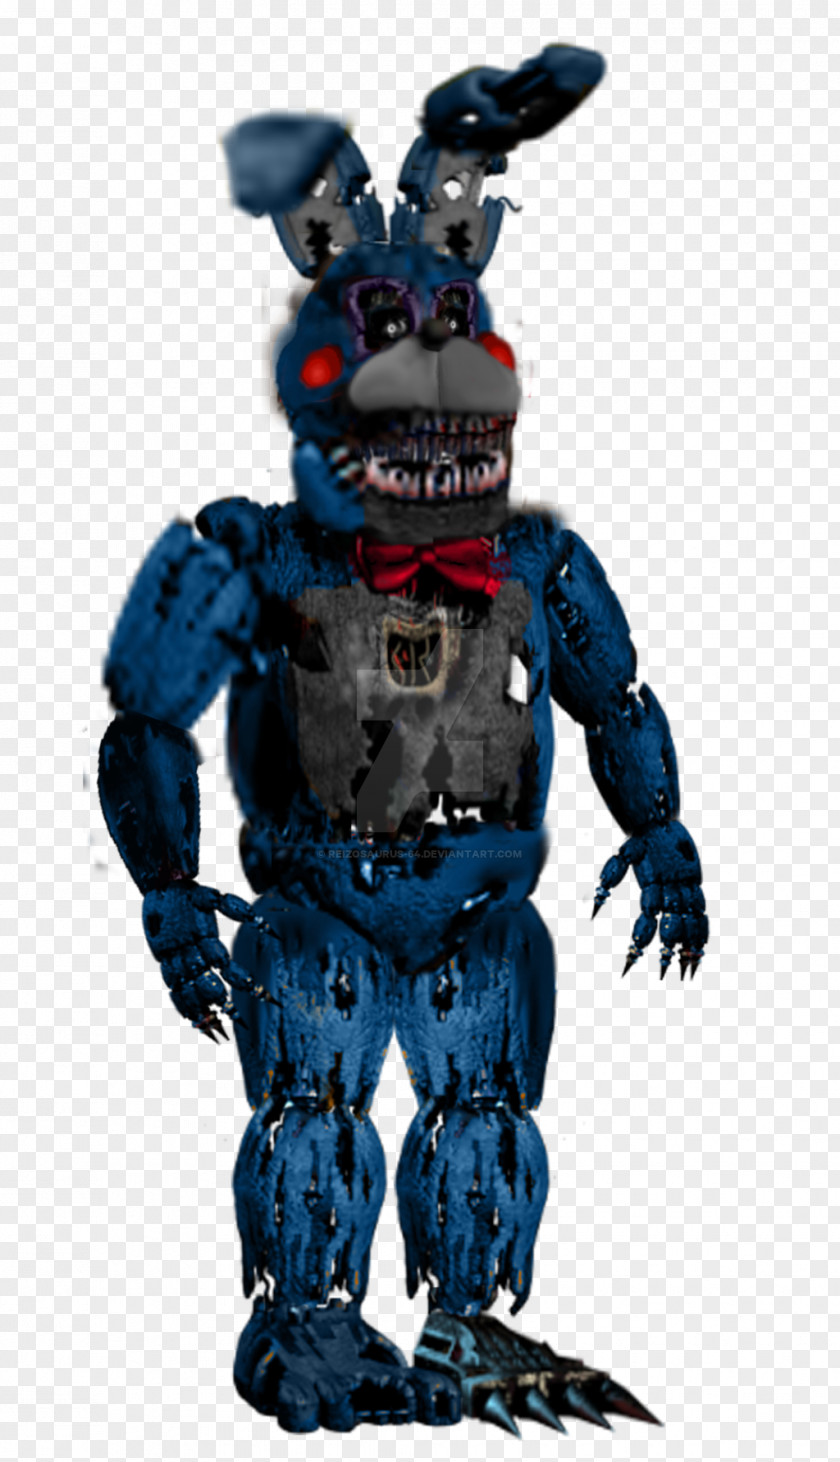 Action & Toy Figures Five Nights At Freddy's Fan Art PNG